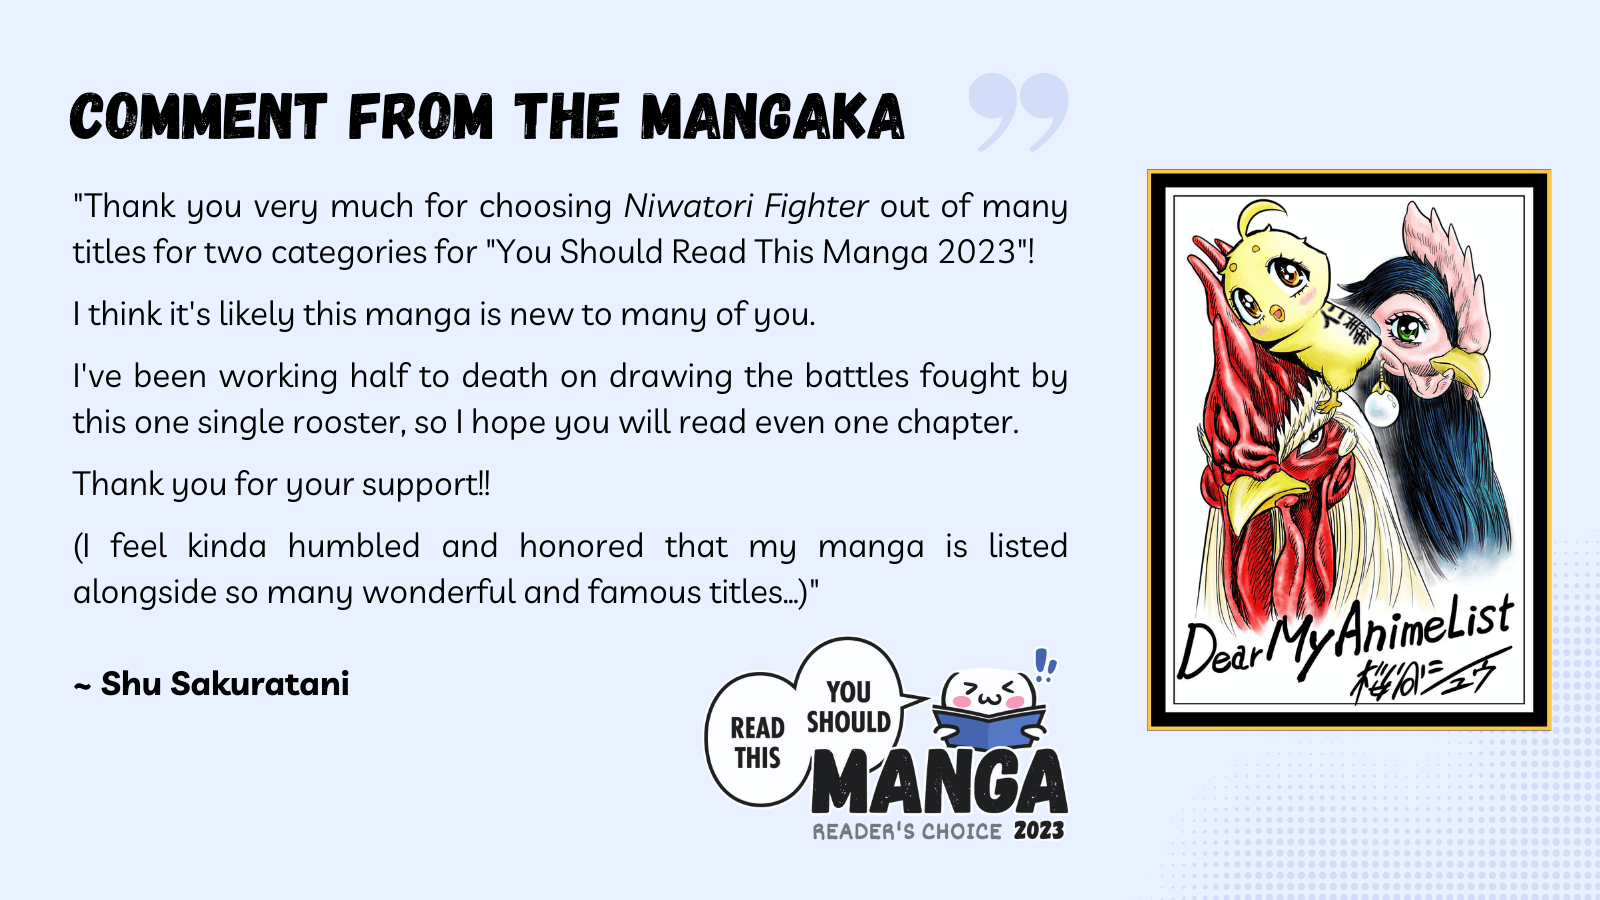 Comment from the mangaka of Niwatori Fighter